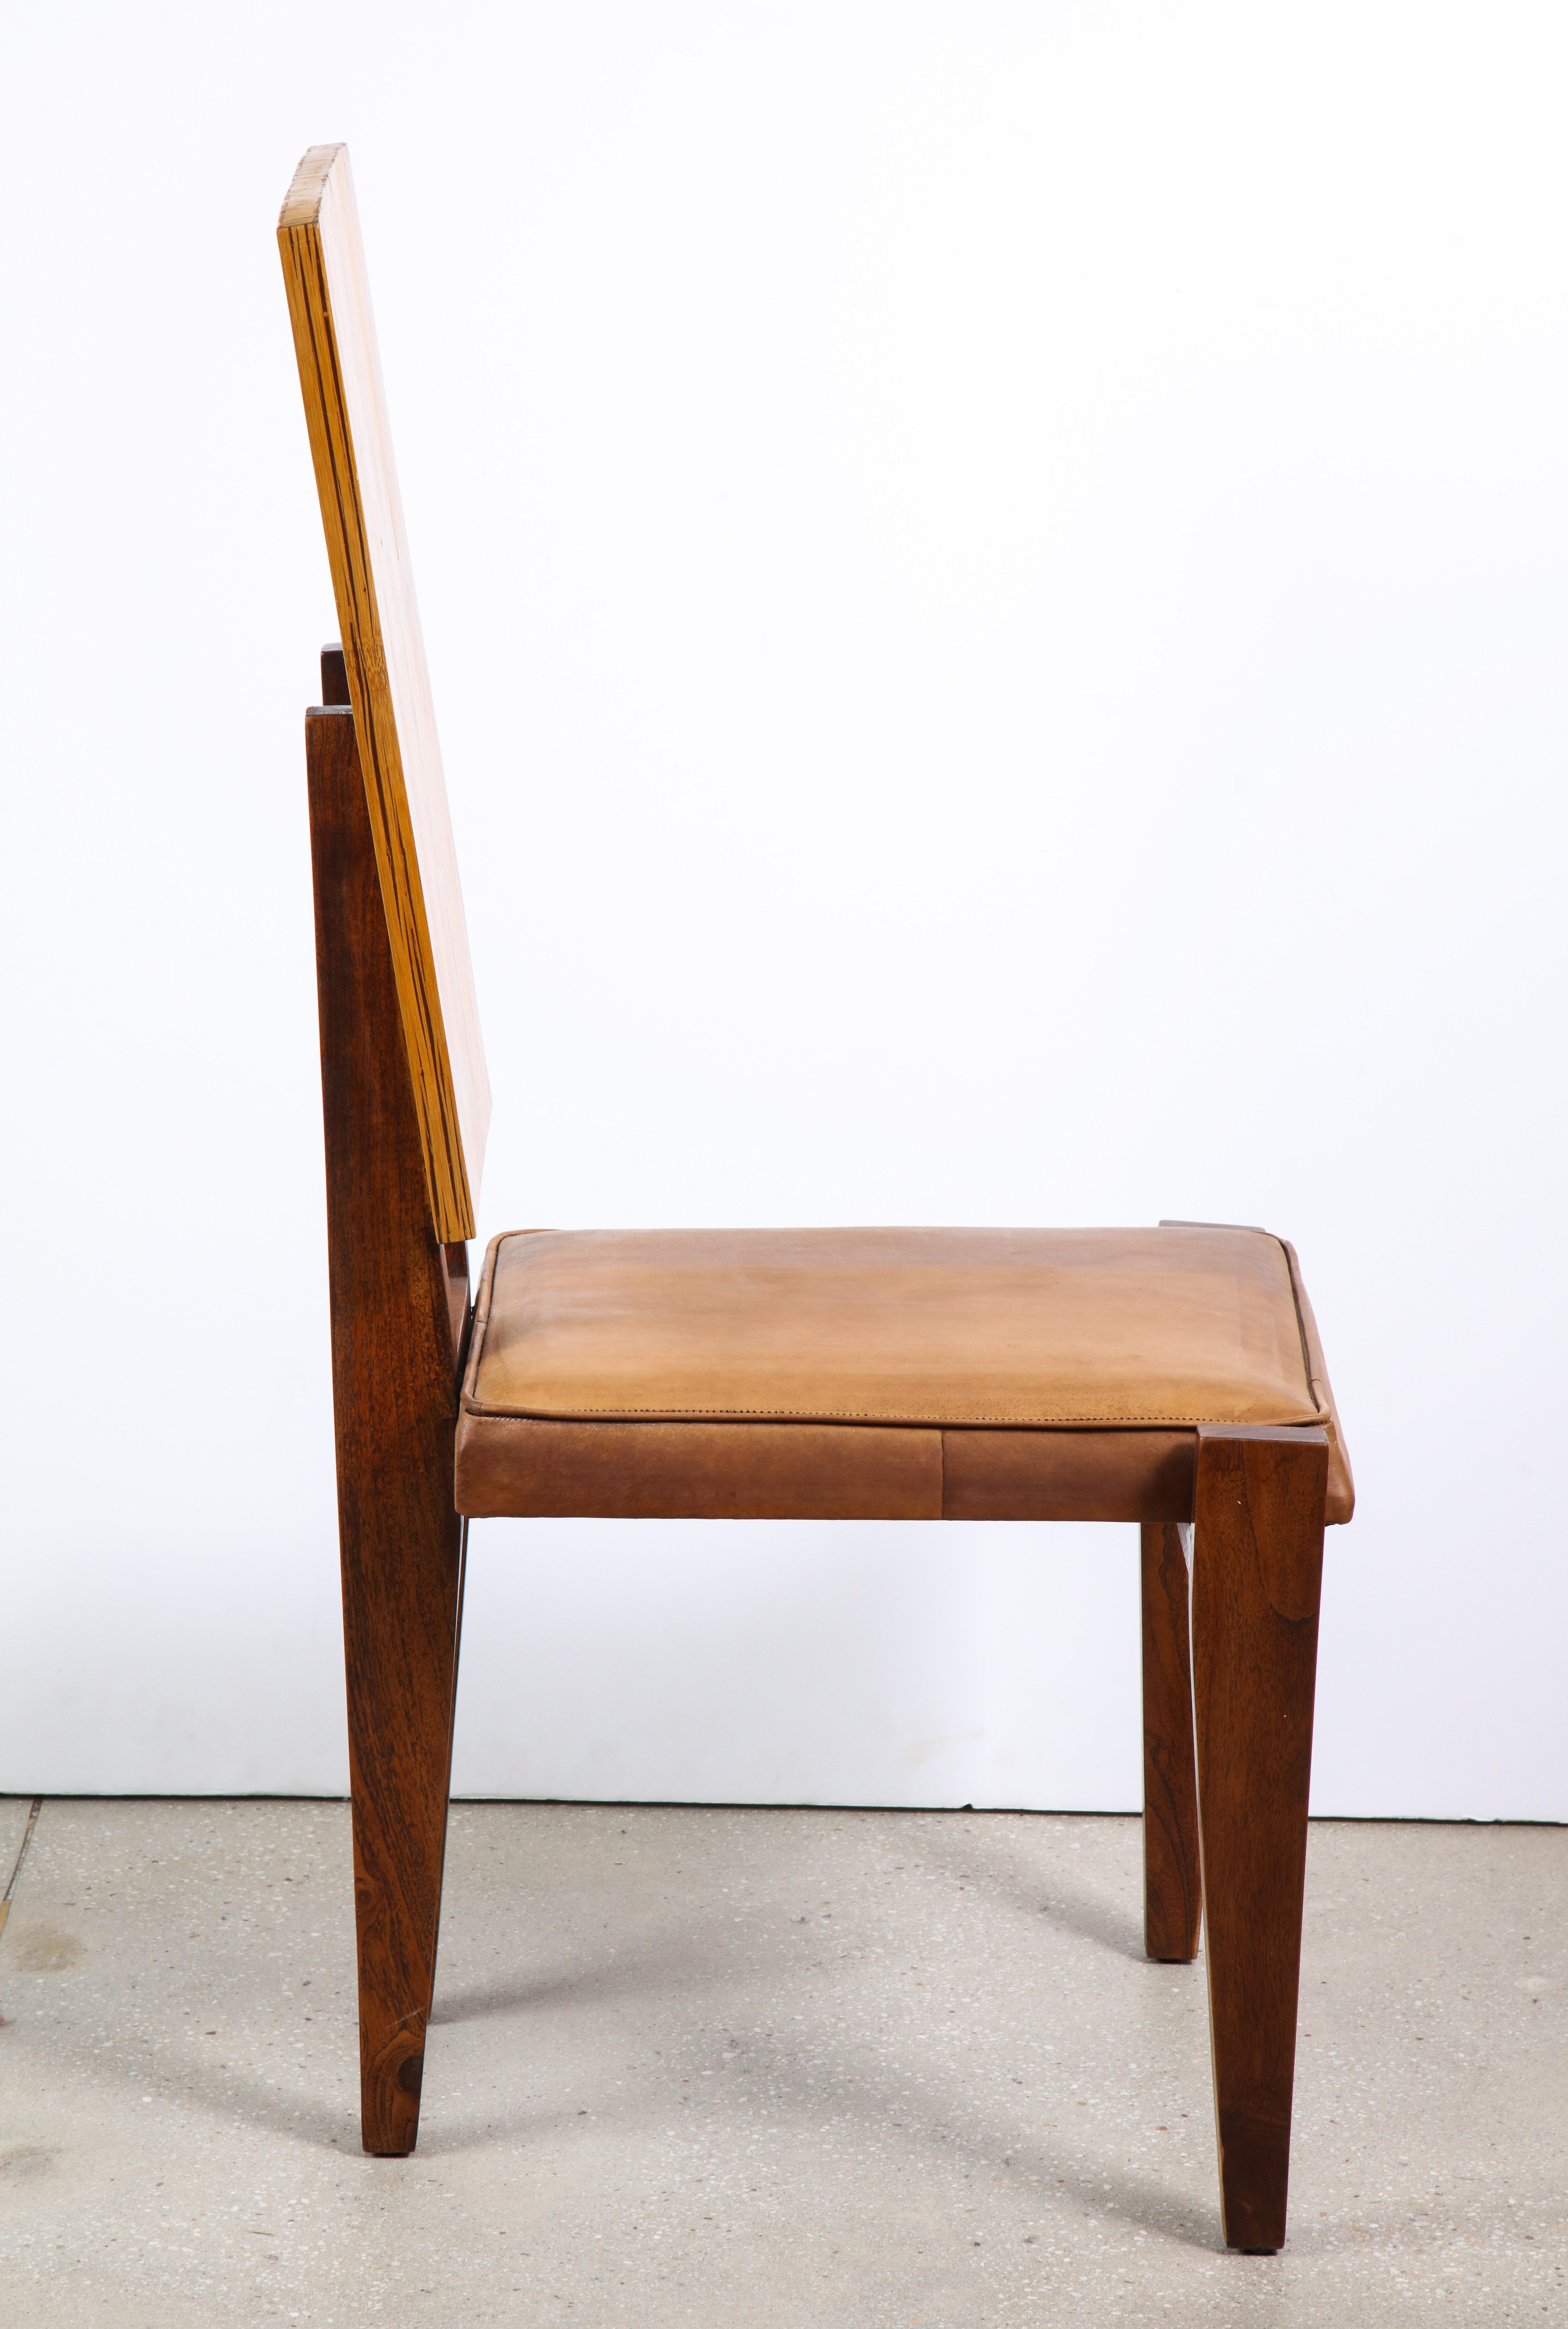 20th Century Bamboo and Ash Side Chair